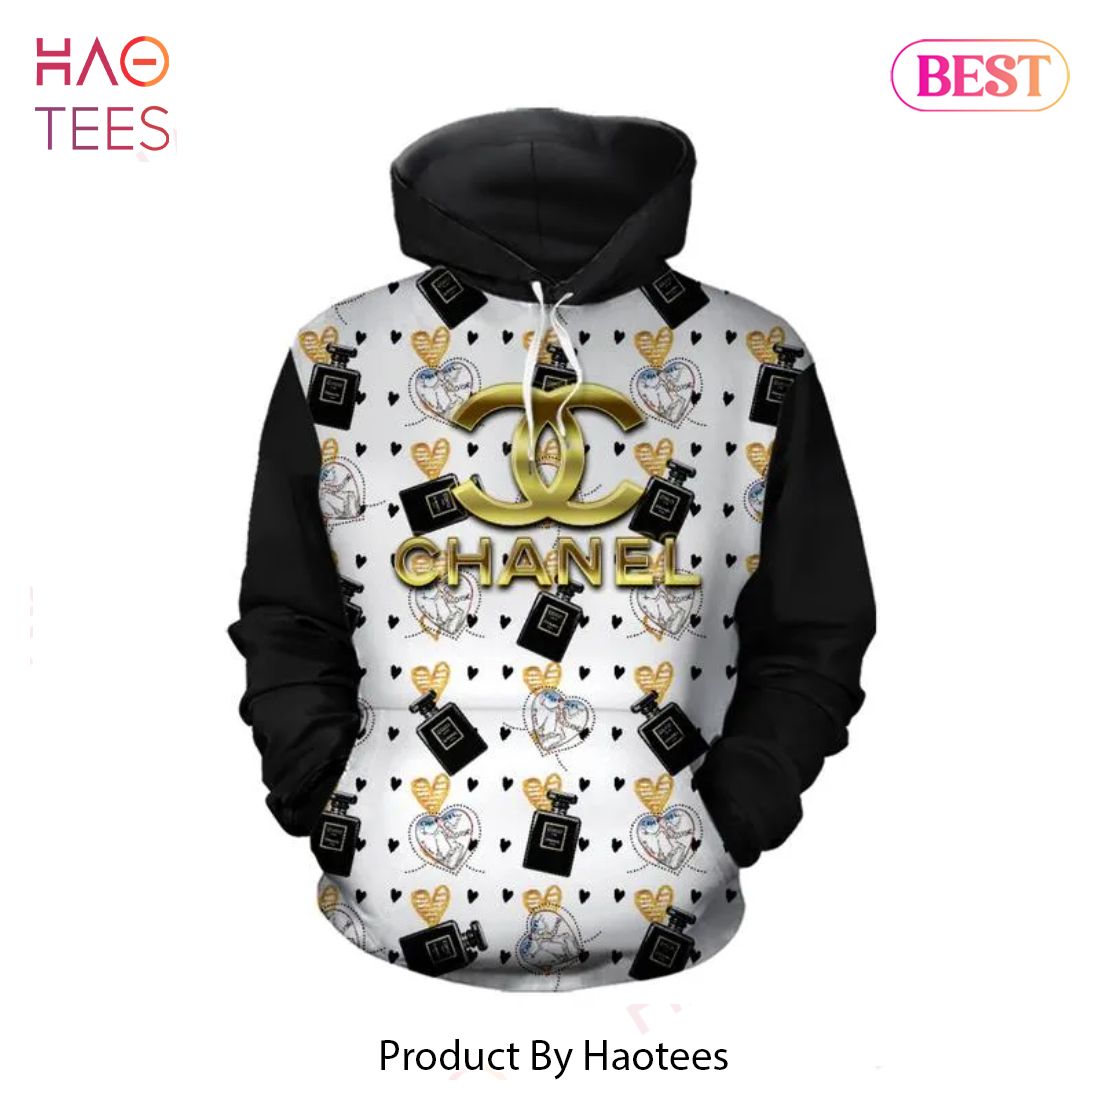 Chanel Perfume Unisex Hoodie For Men Women Luxury Brand Clothing Clothes Outfit